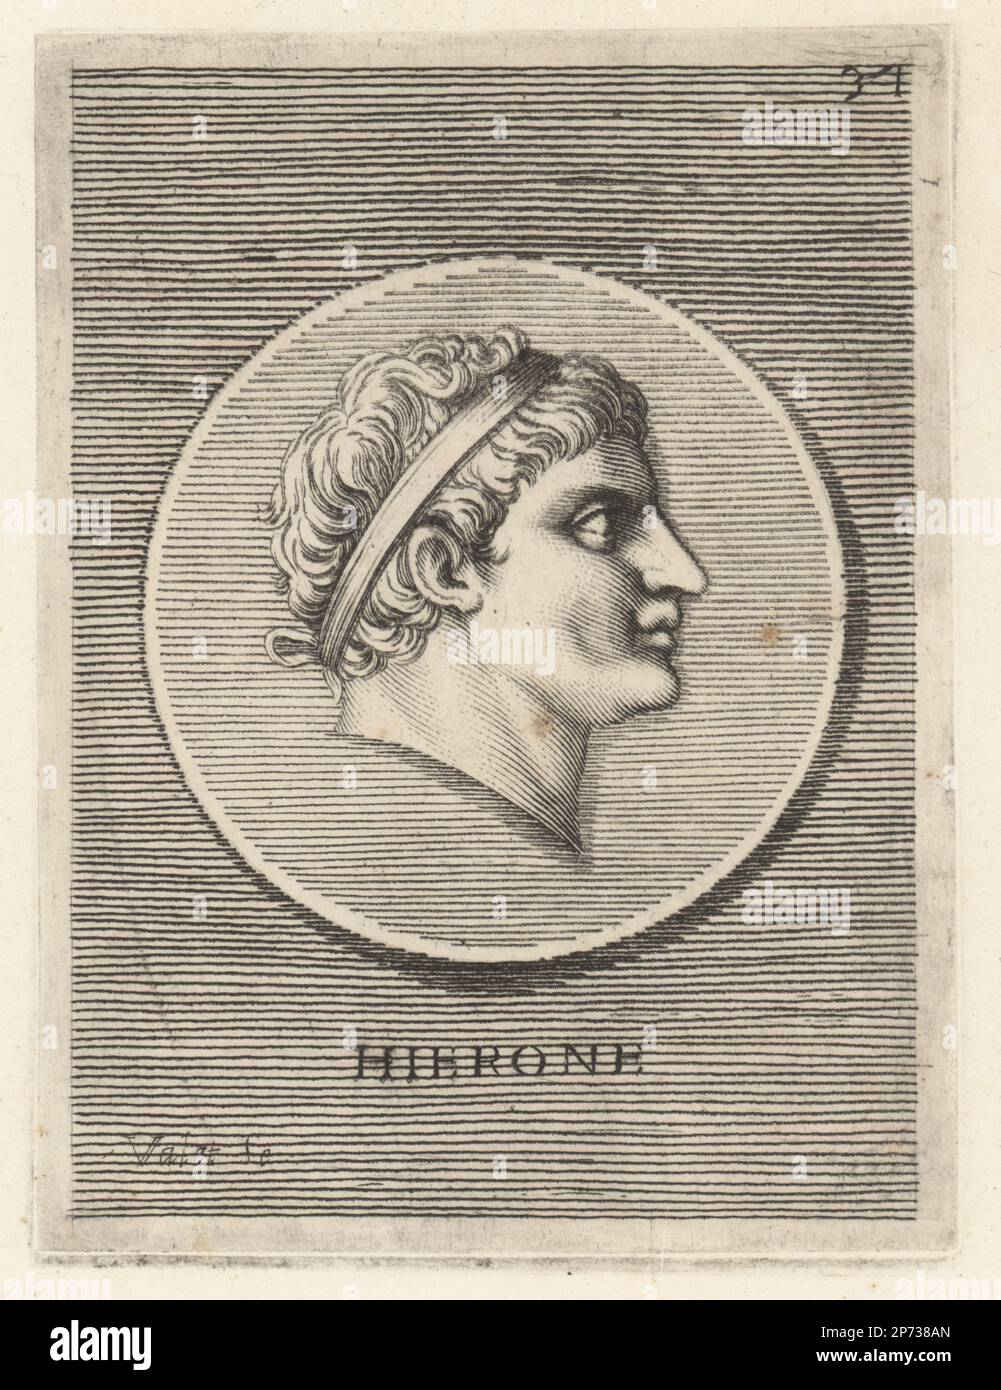 Hiero I, or Hieron I, tyrant of Syracuse, Sicily, 478 to 467 BC. Son of Deinomenes, and brother of Gelon. He sided with the Cumaeans in their battle against the Etruscans at the Battle of Cumae 474 BC. Head of a man wearing royal diadem. Hierone. Copperplate engraving by Guillaume Vallet after Giovanni Angelo Canini from Iconografia, cioe disegni d'imagini de famosissimi monarchi, regi, filososi, poeti ed oratori dell' Antichita, Drawings of images of famous monarchs, kings, philosophers, poets and orators of Antiquity, Ignatio de’Lazari, Rome, 1699. Stock Photo